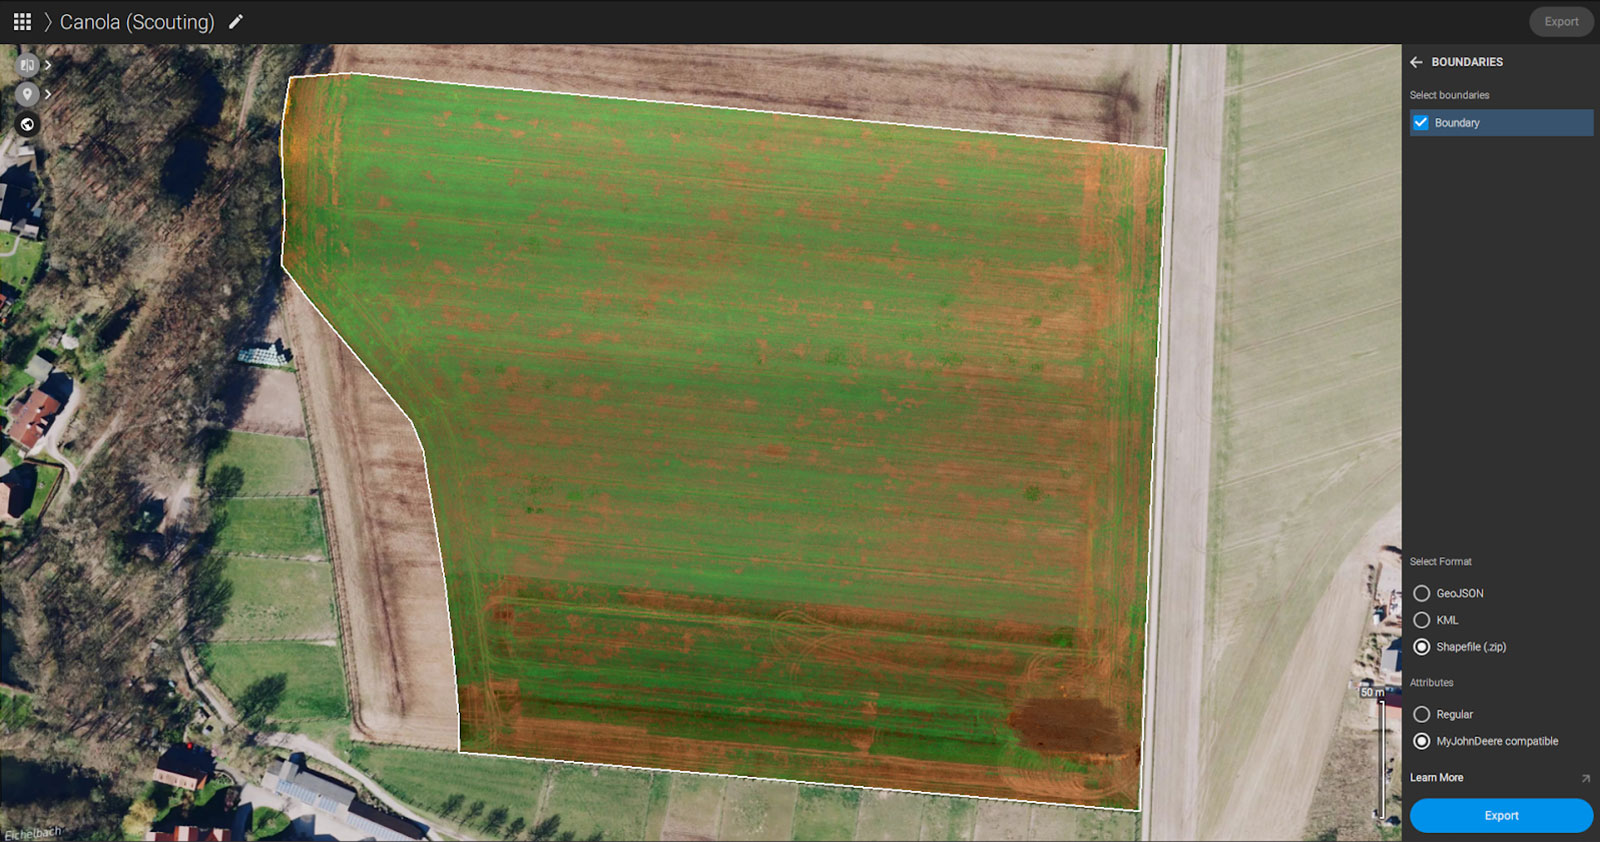 Boundaries on an drone map for agriculture